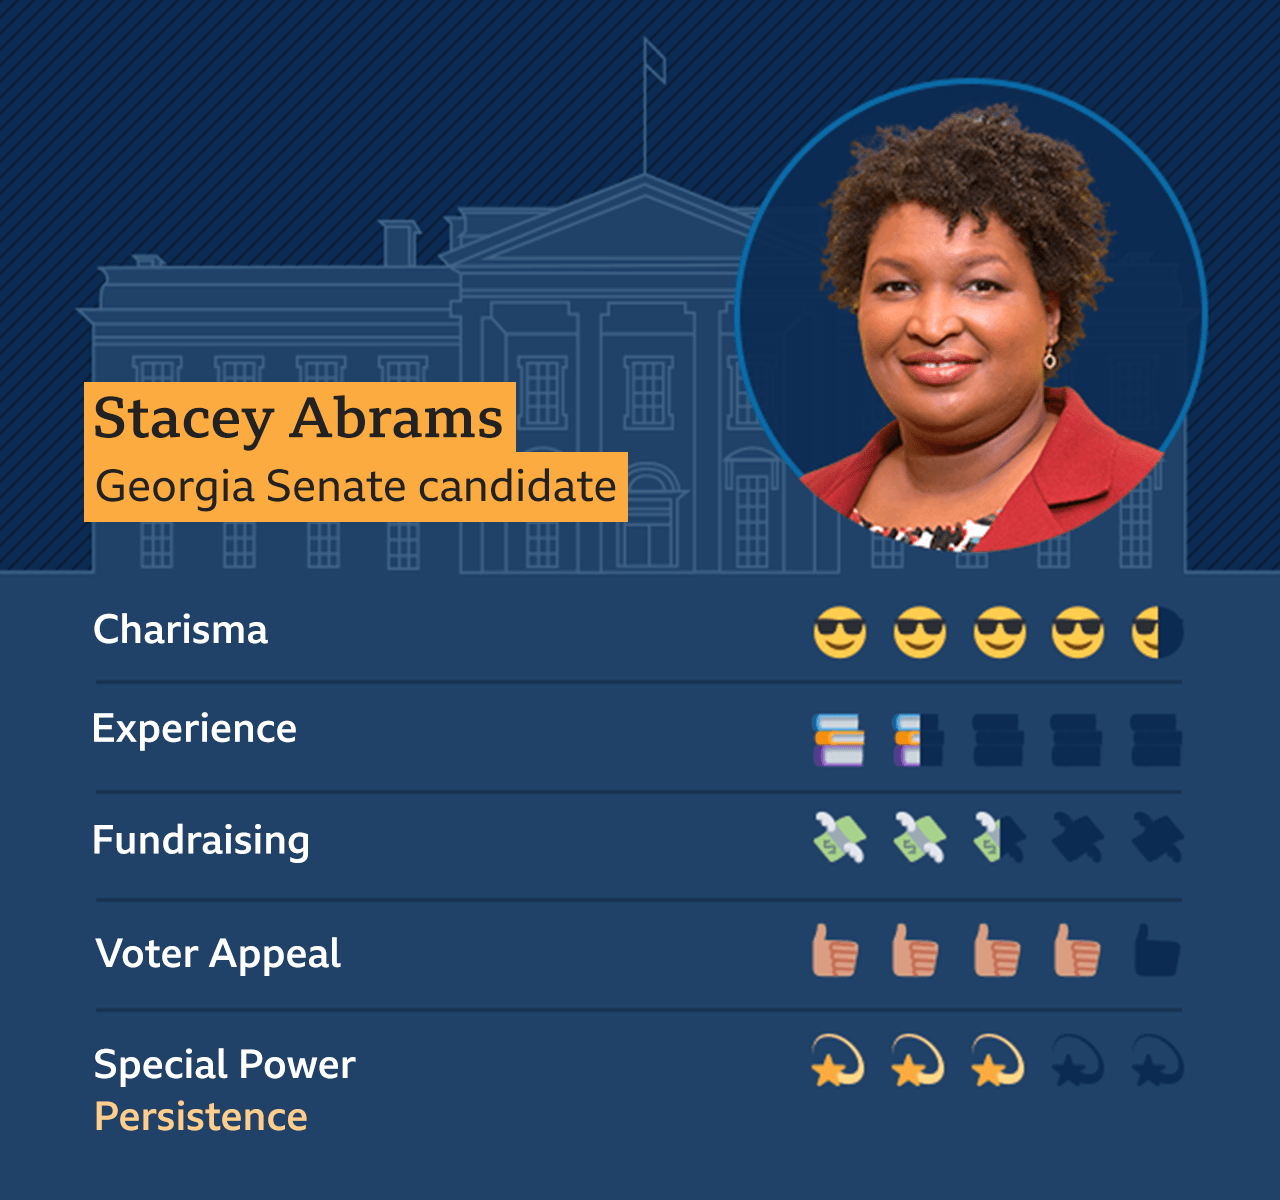 Graphic of Stacey Abrams, Georgia Senate candidate: Charisma - 4.5, Experience - 1.5, Fundraising - 2.5, Voter appeal - 4, Special Power - Persistence - 3.5